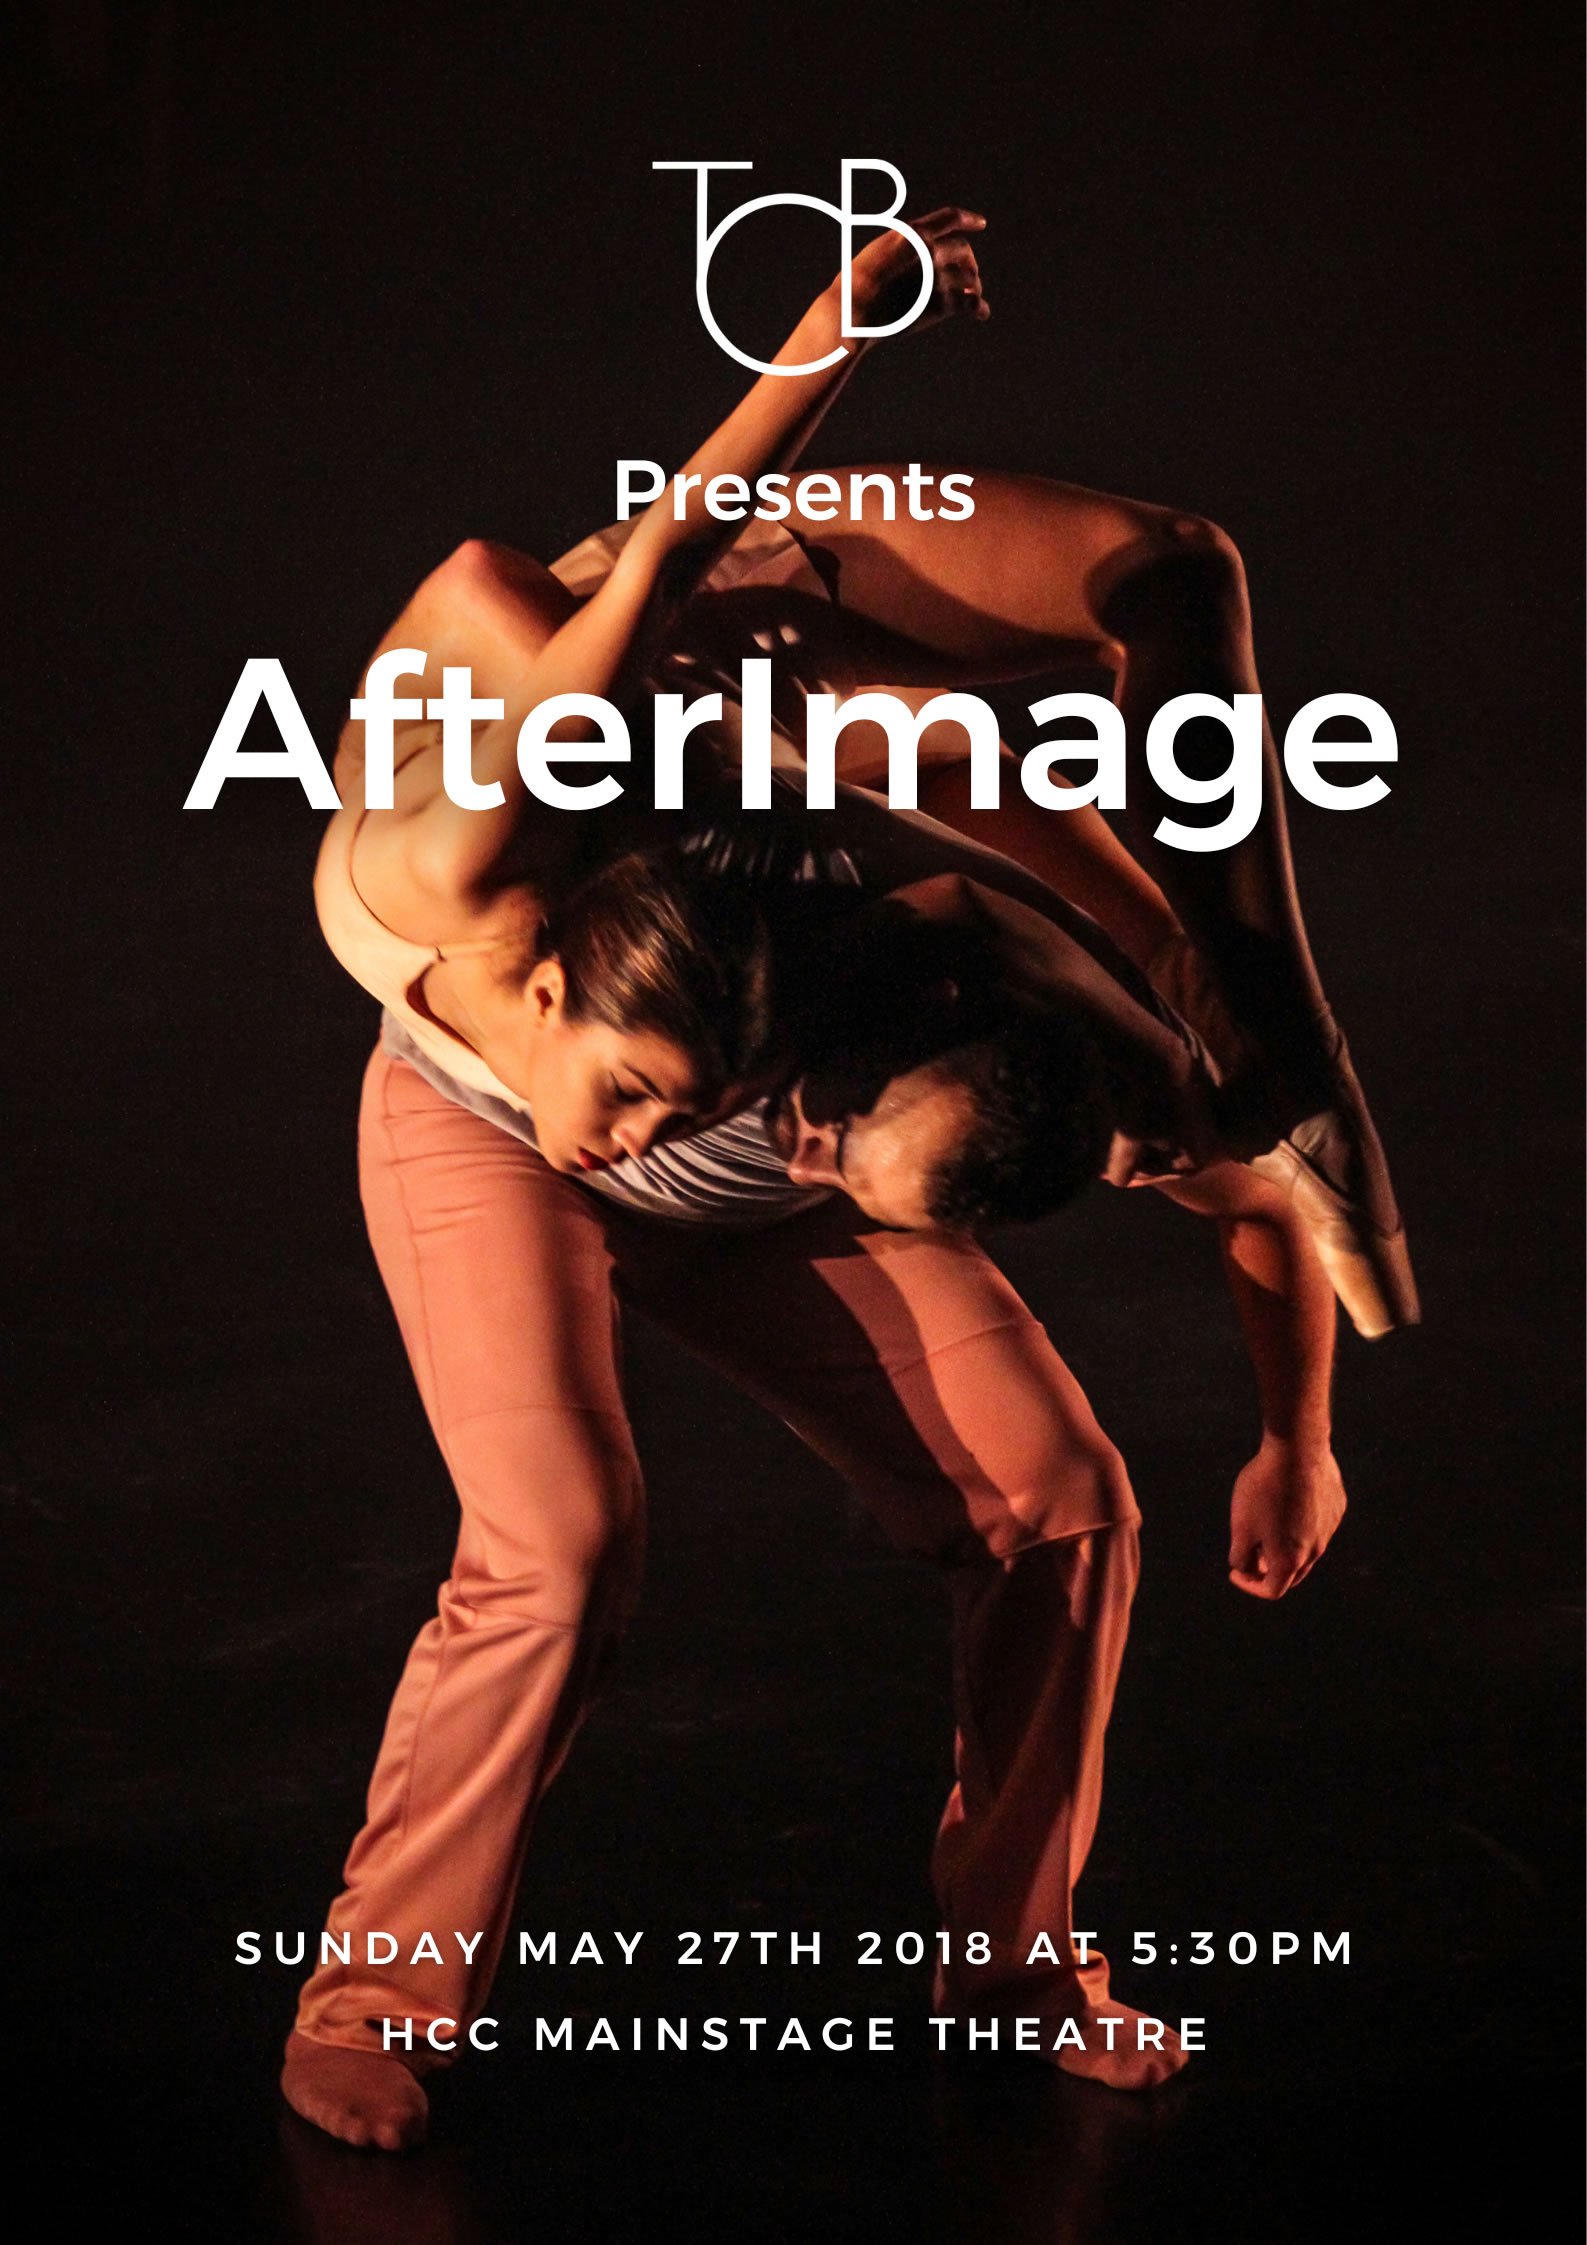 afterimage-event-work-tcb.jpg